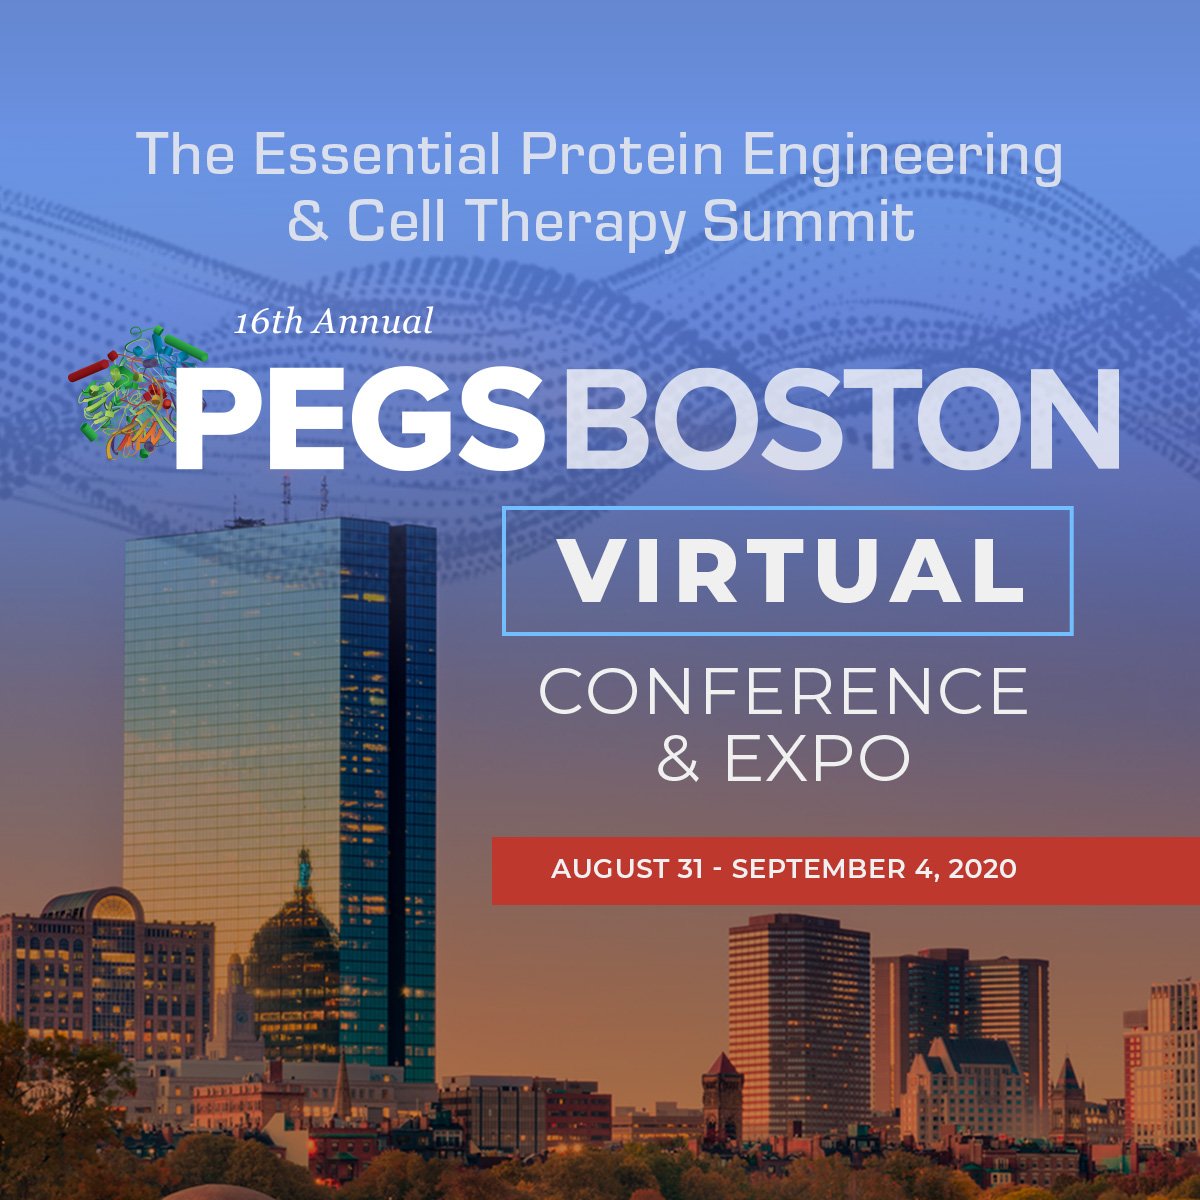 PEGS Boston Virtual Conference (Aug. 31 Sept. 4, 2020